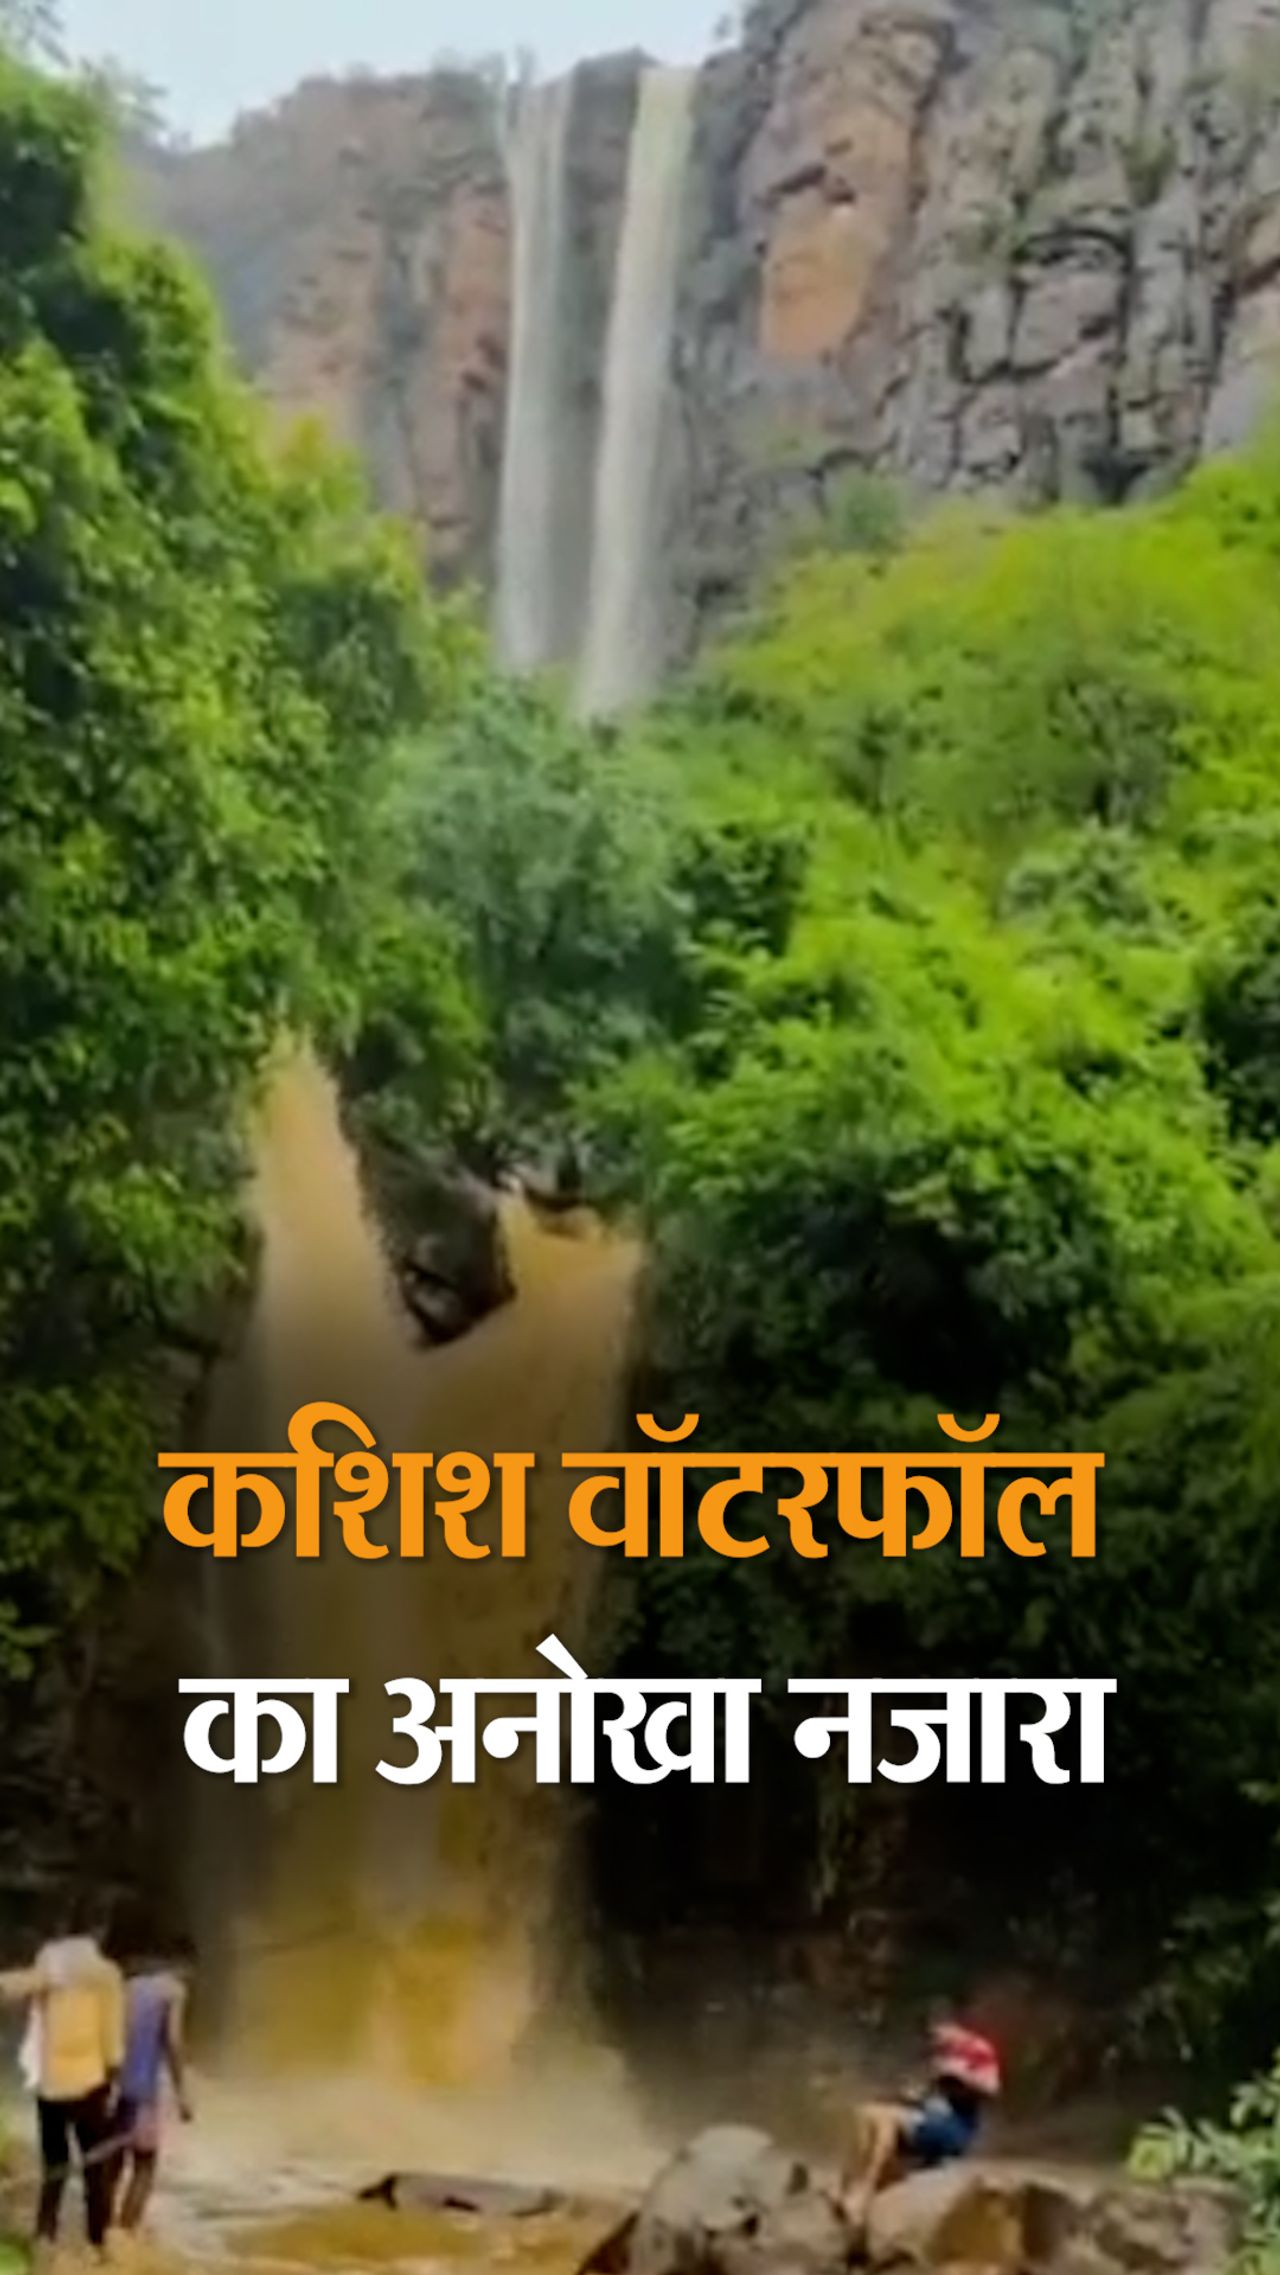 Kashish Waterfall falls from a height of 850 feet